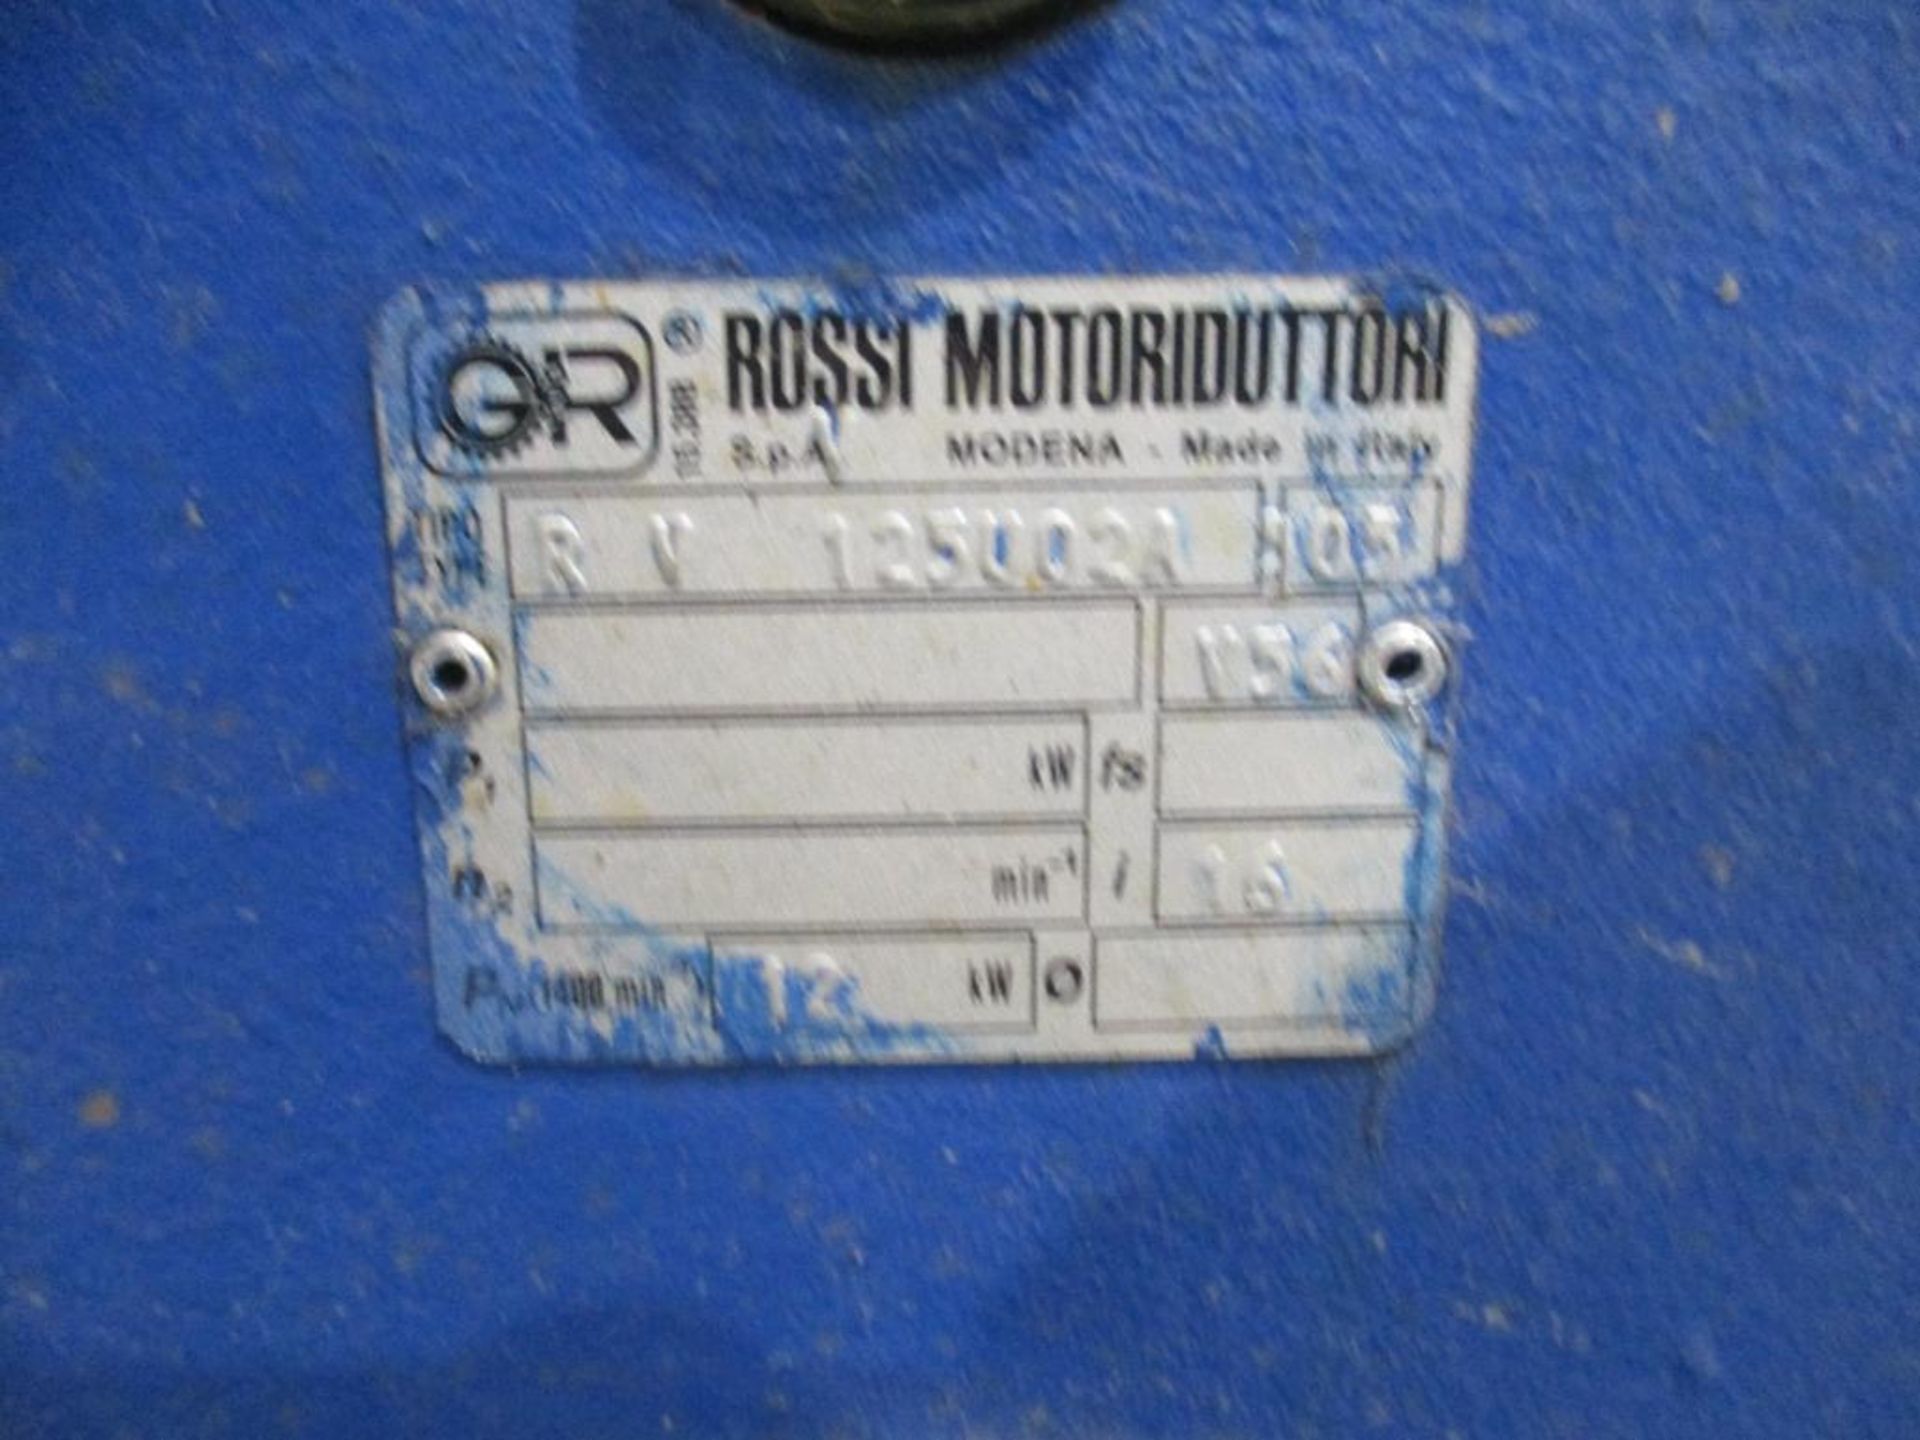 ROSSI MOTORIDUTTORI 16 RATIO REDUCER P/N RV125U02A, 163# lbs (There will be a $40 Rigging/Prep fee a - Image 5 of 5